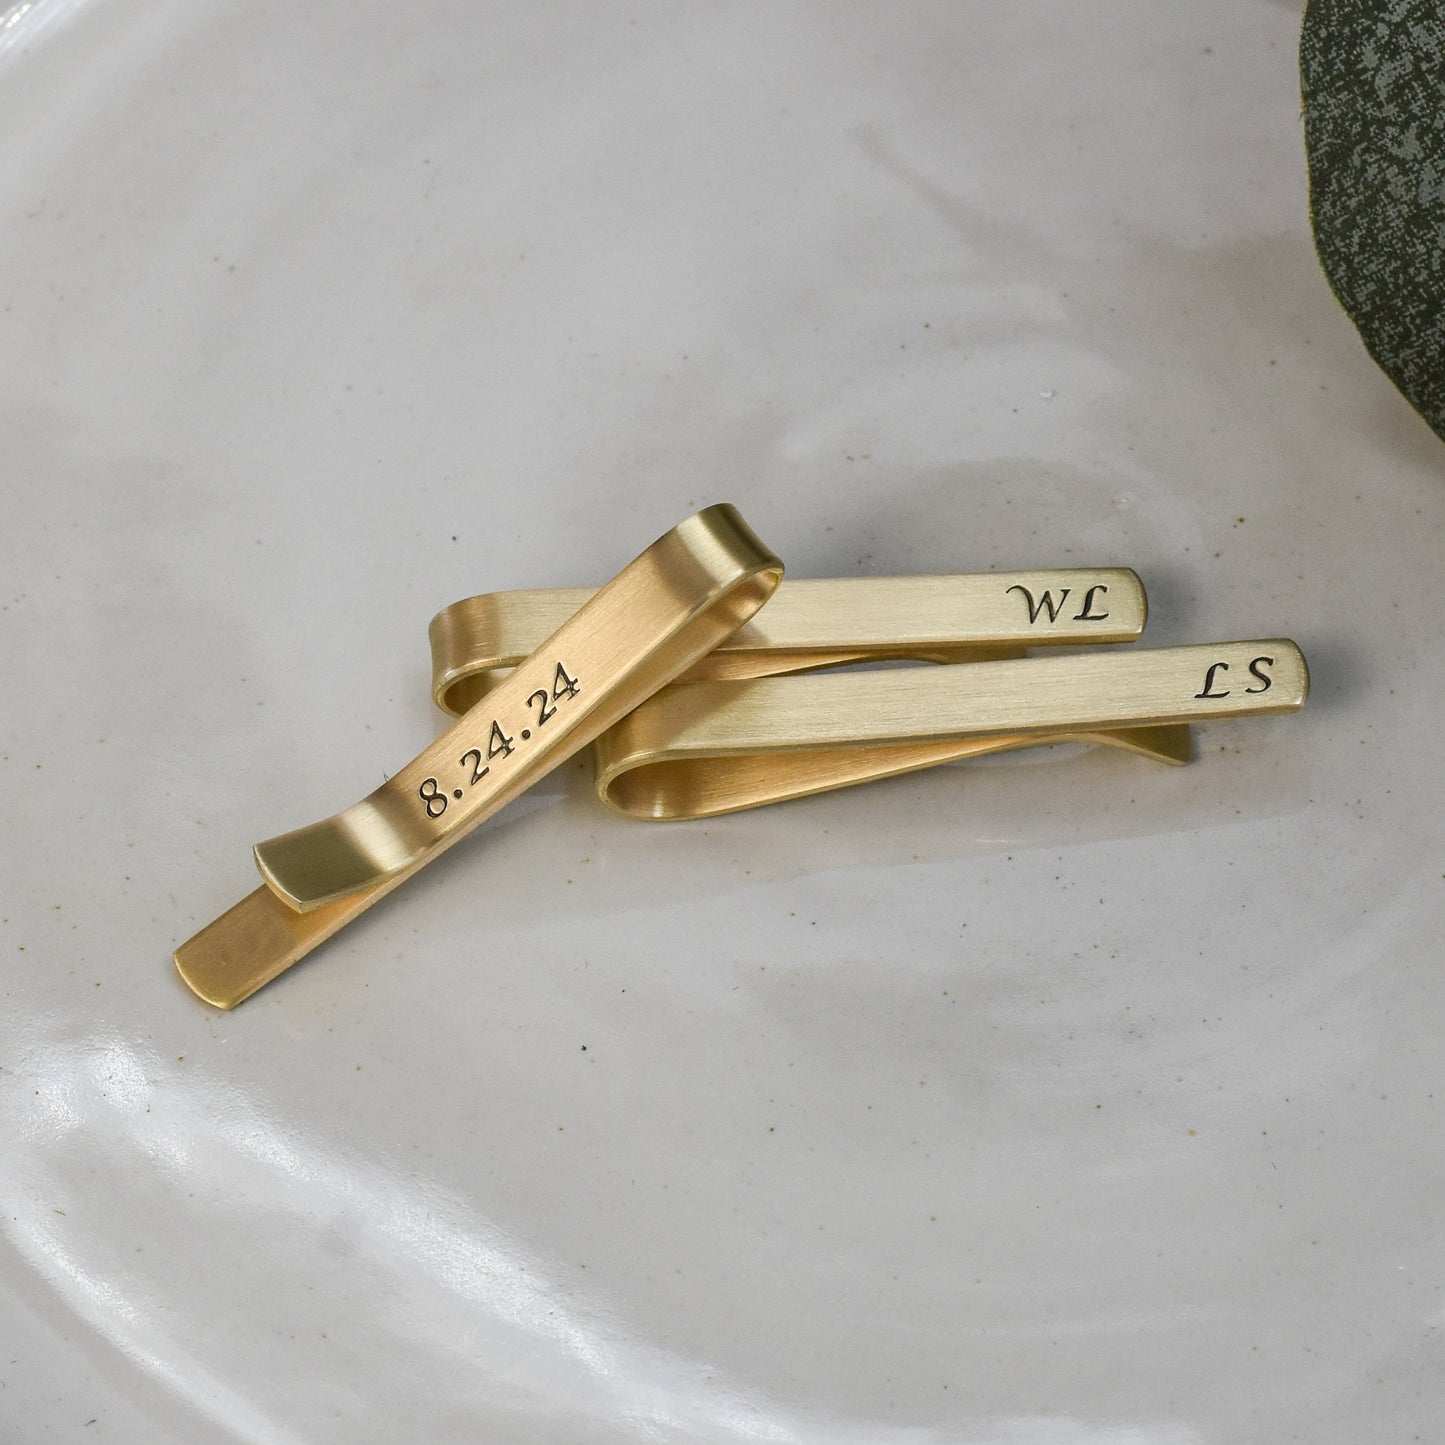 Personalized gold brass tie clip with hidden date on back in calligraphy font.